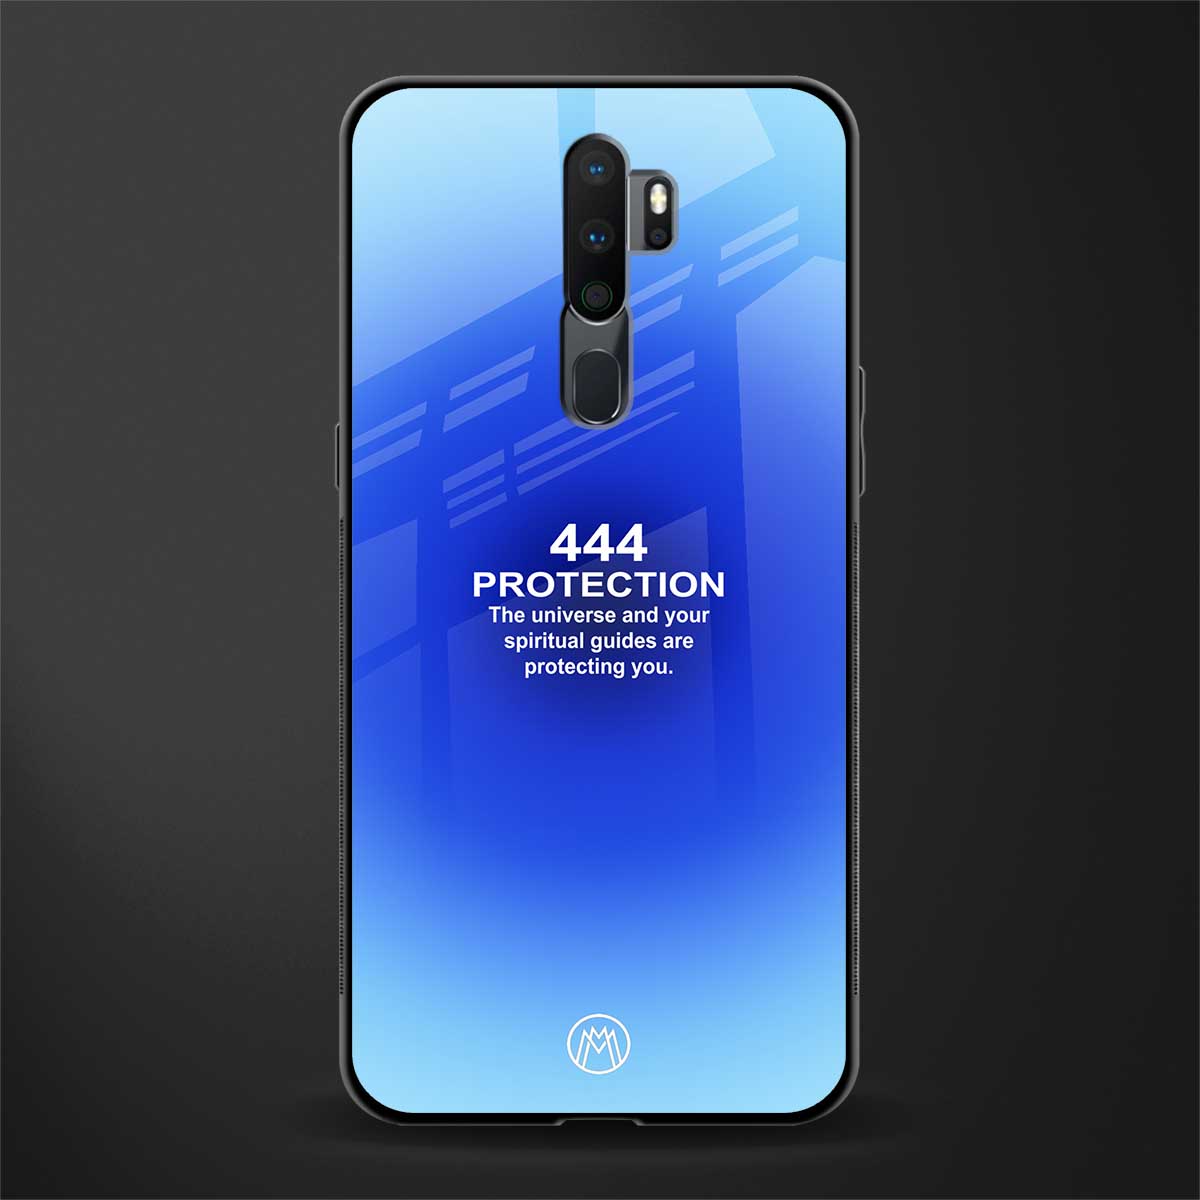 444 protection glass case for oppo a9 2020 image